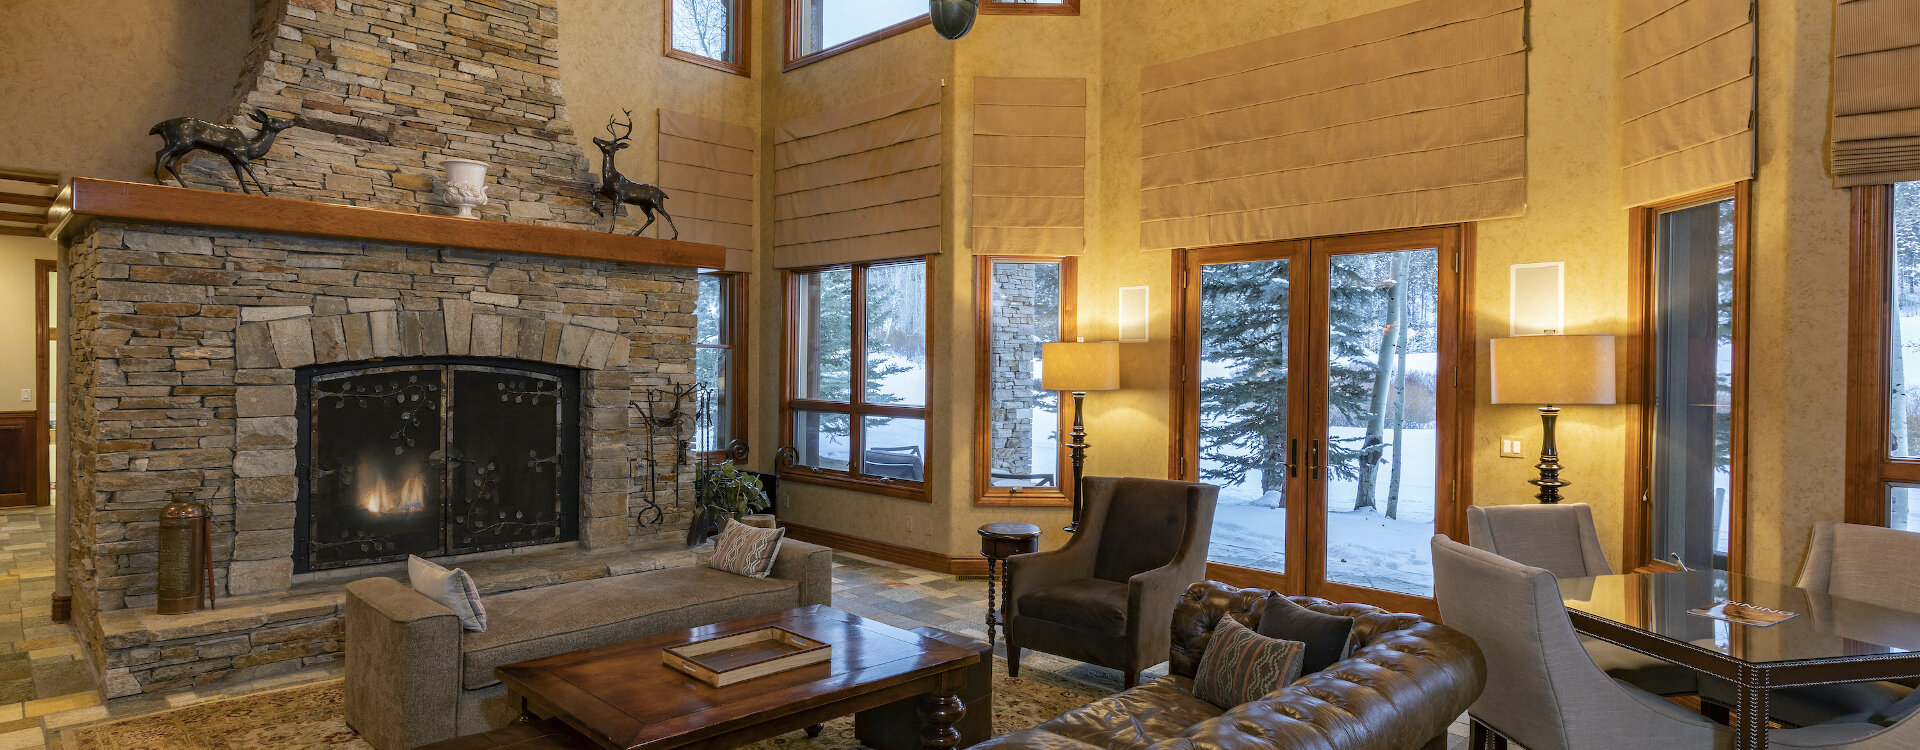 1.02-telluride-gold-hill-living-room-fireplace